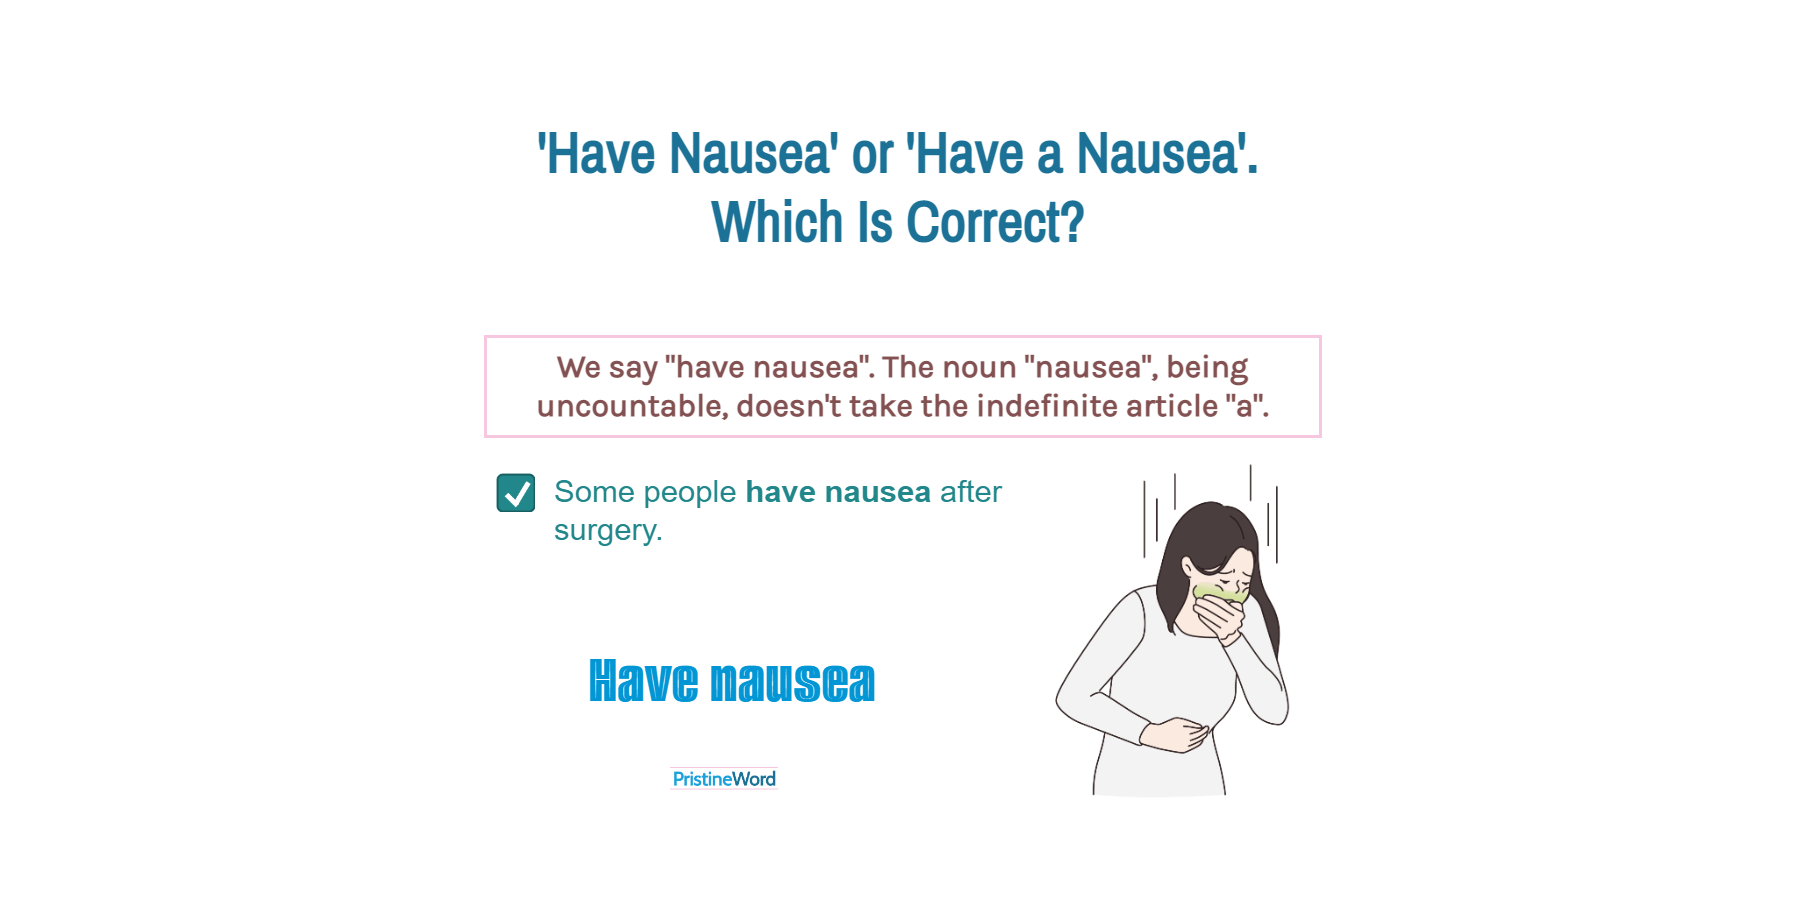 Have Nausea or Have a Nausea. Which Is Correct?